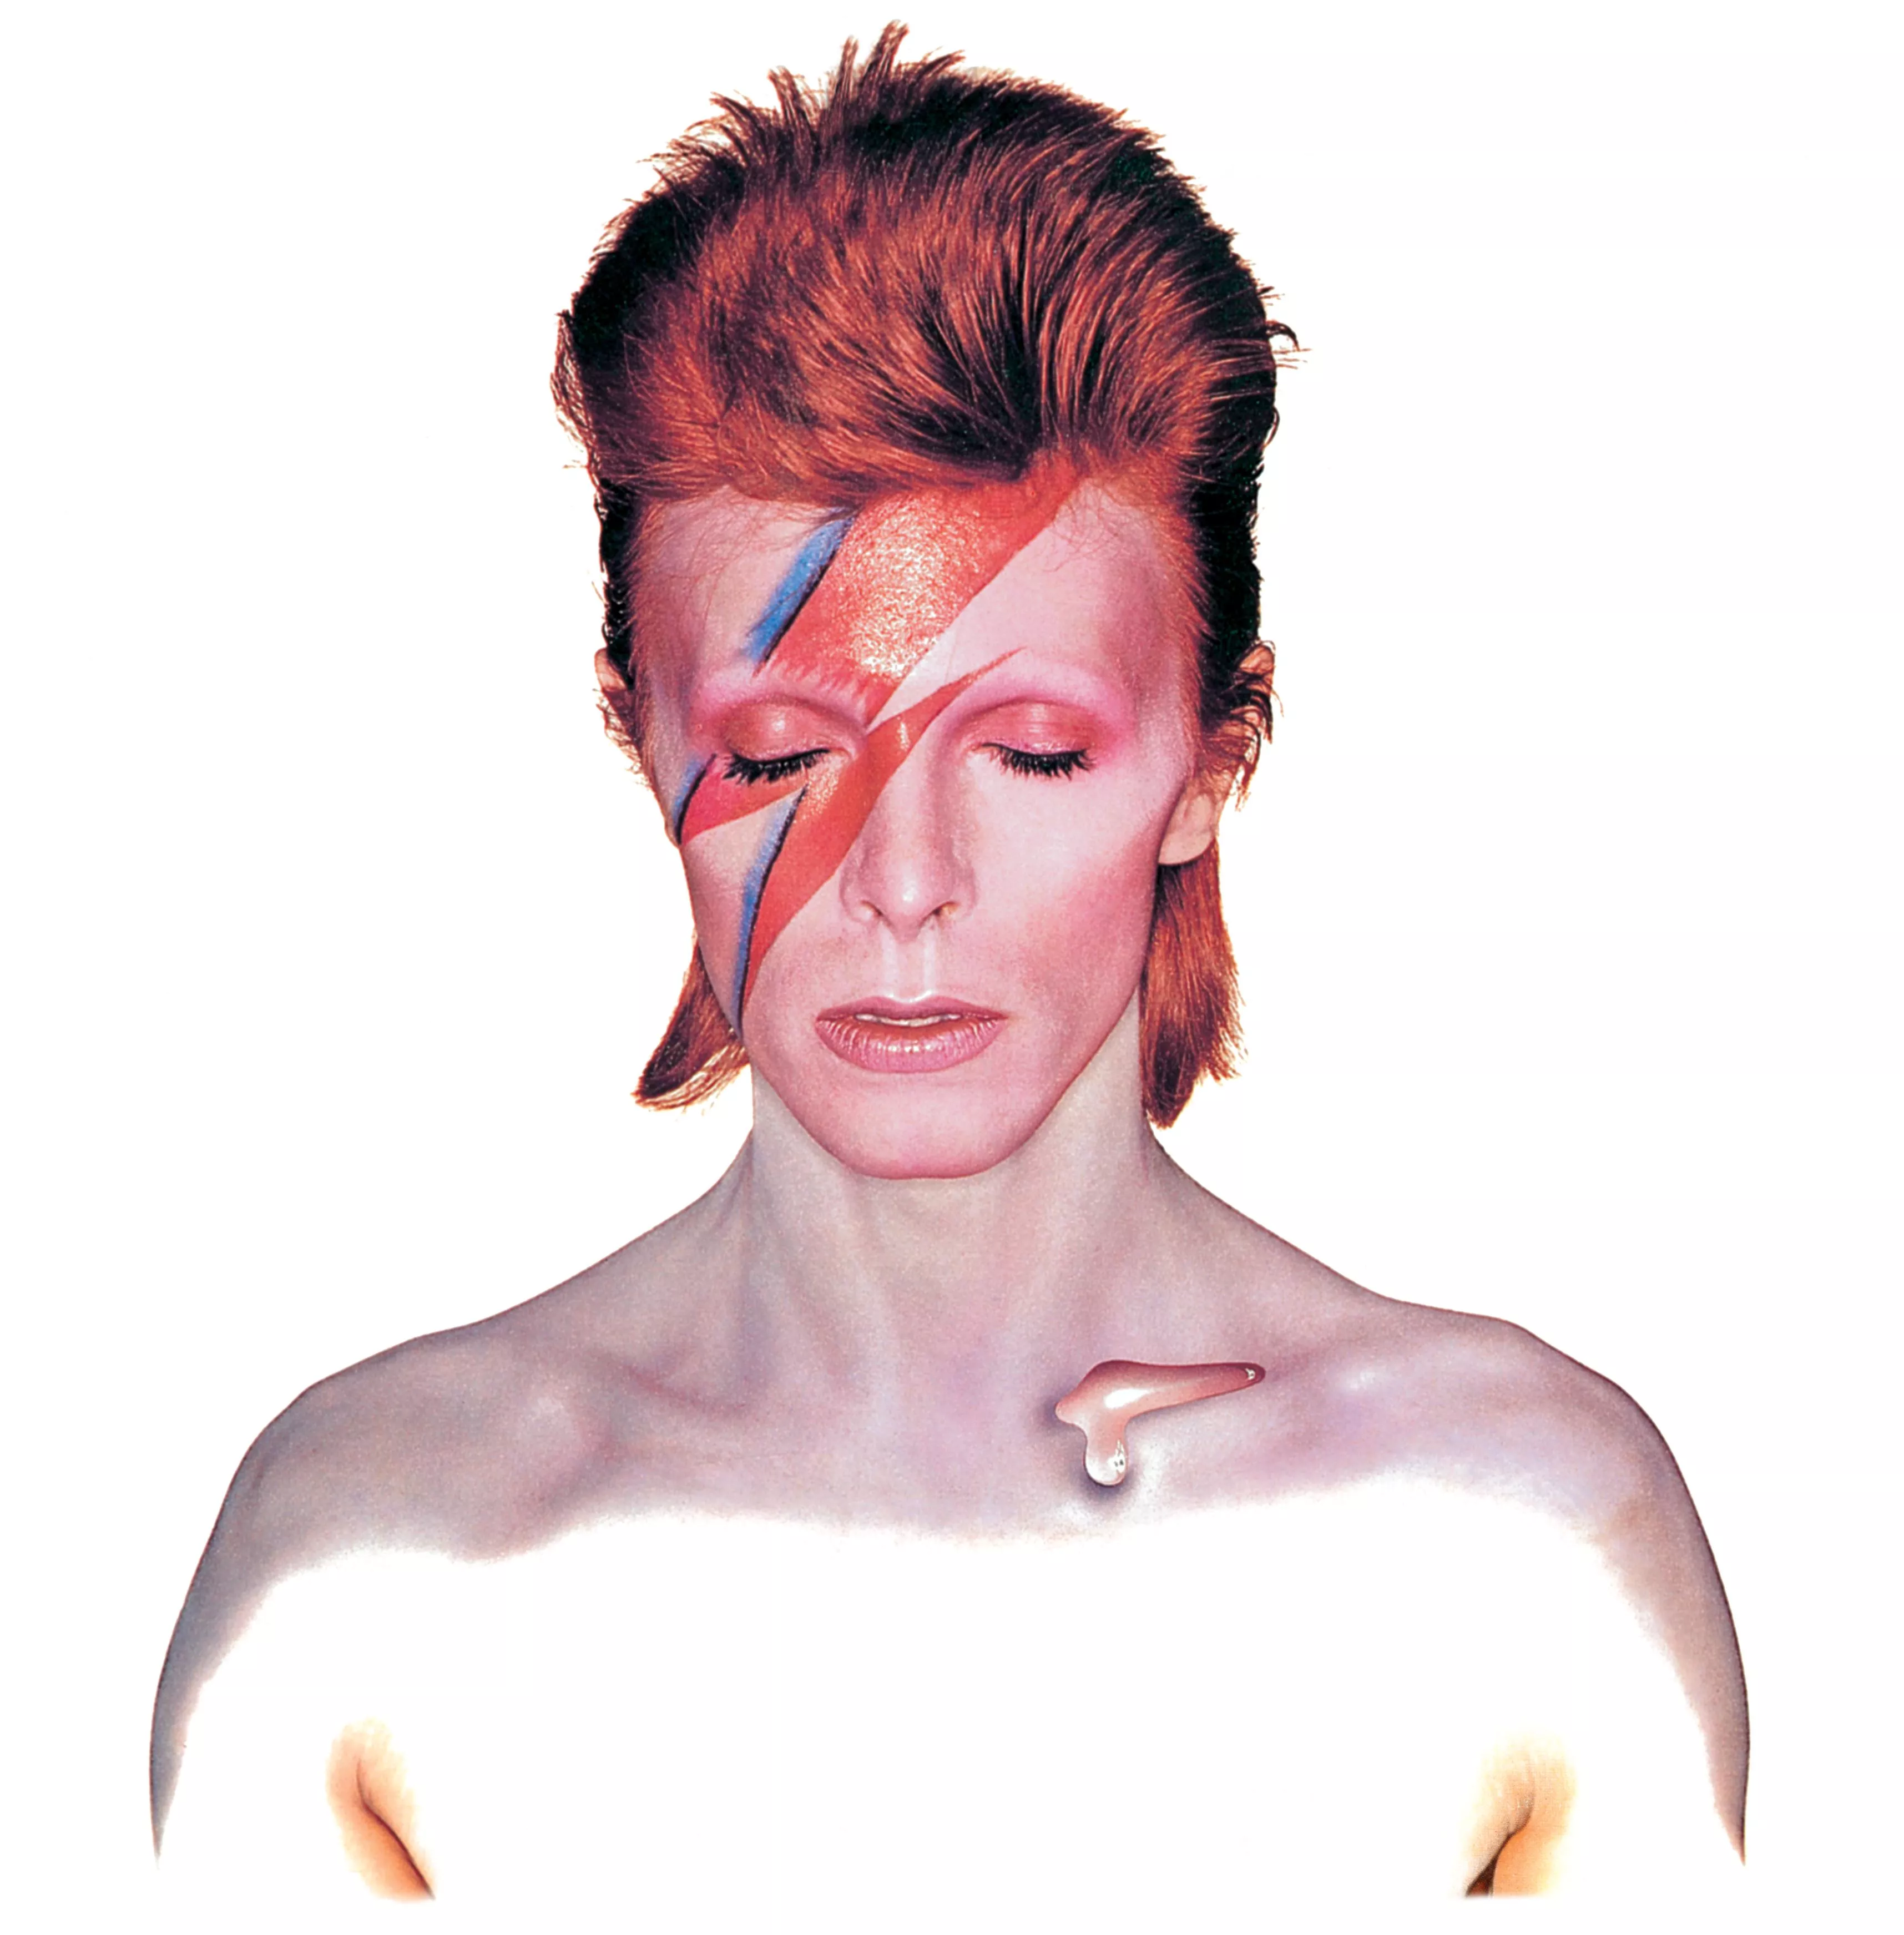 Nekrolog: Ashes to Ashes – David Bowie 1947-2016 